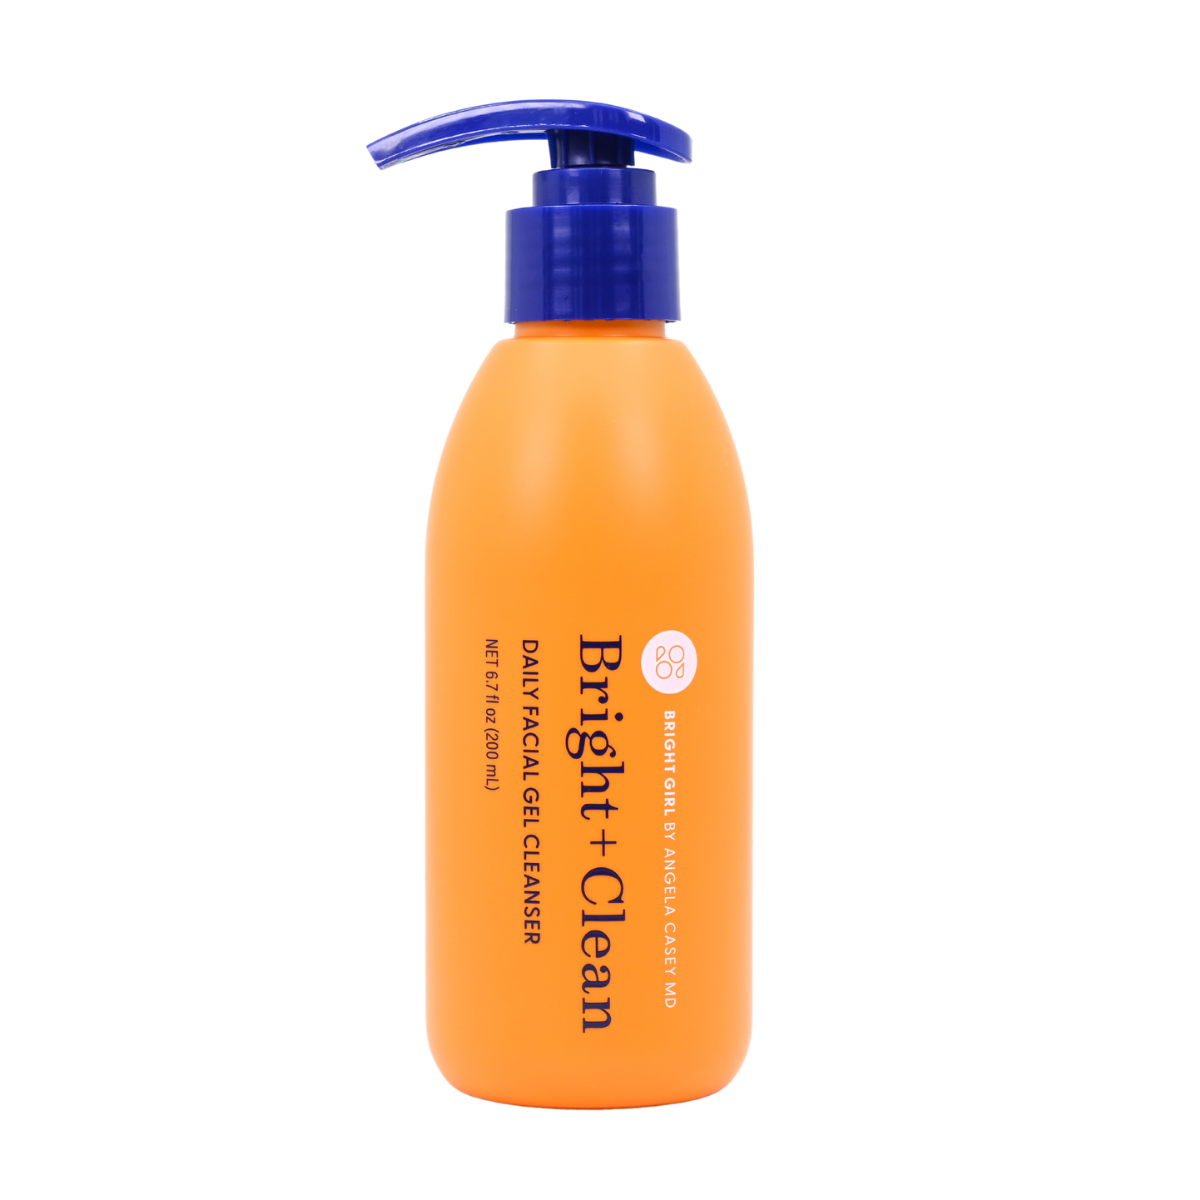 Bright Girl Bright and Clean Daily Facial Gel Cleanser Shop At Exclusive Beauty